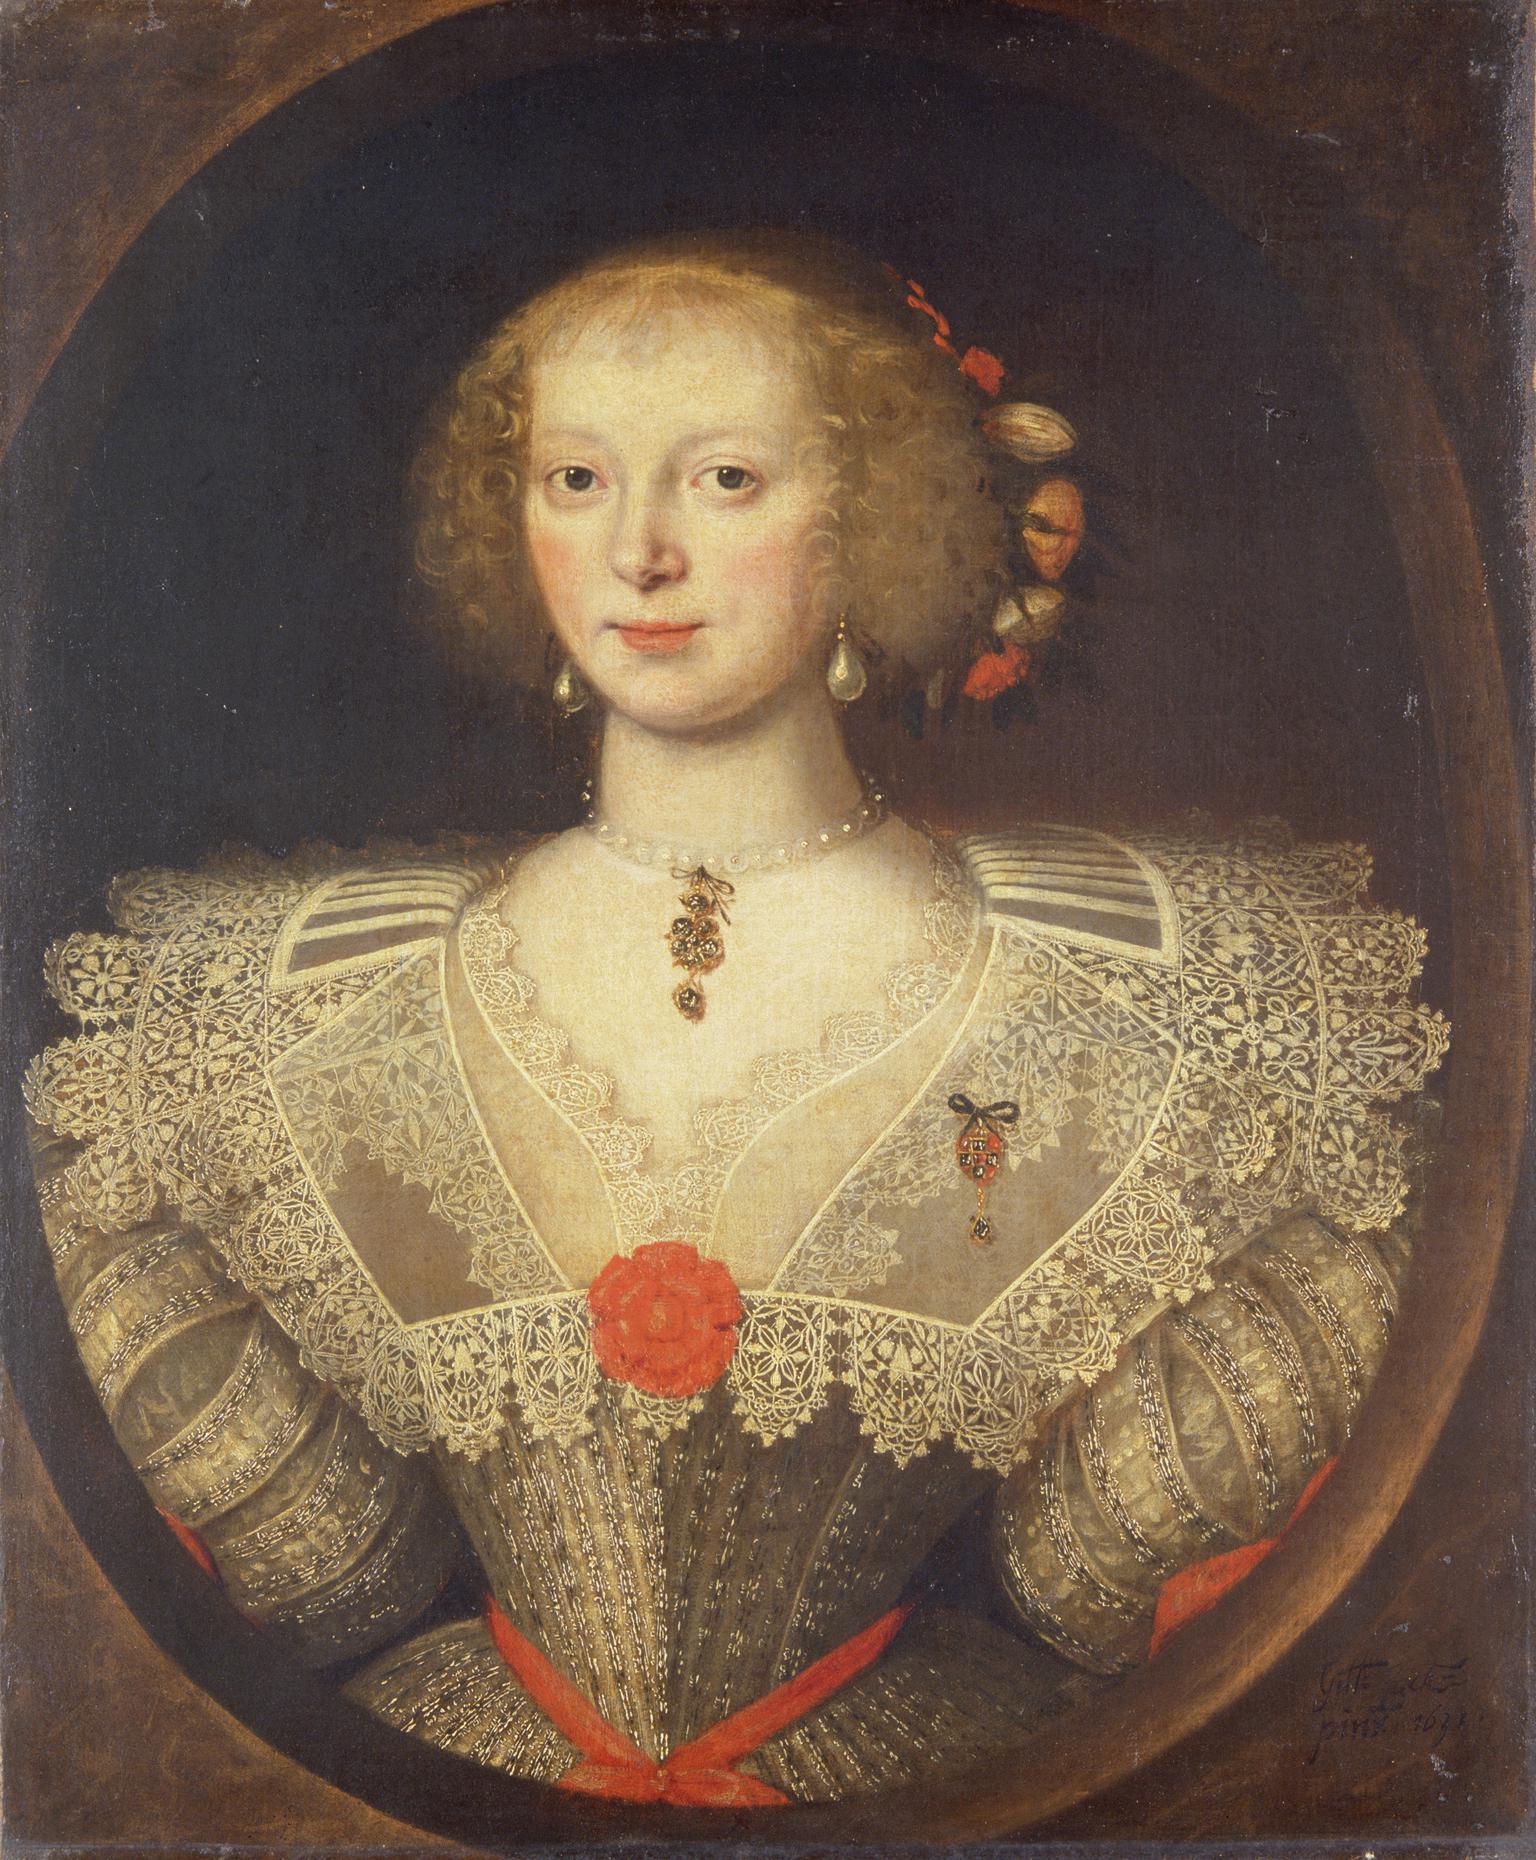 Portrait of a lady, called "Countess of Cavan"